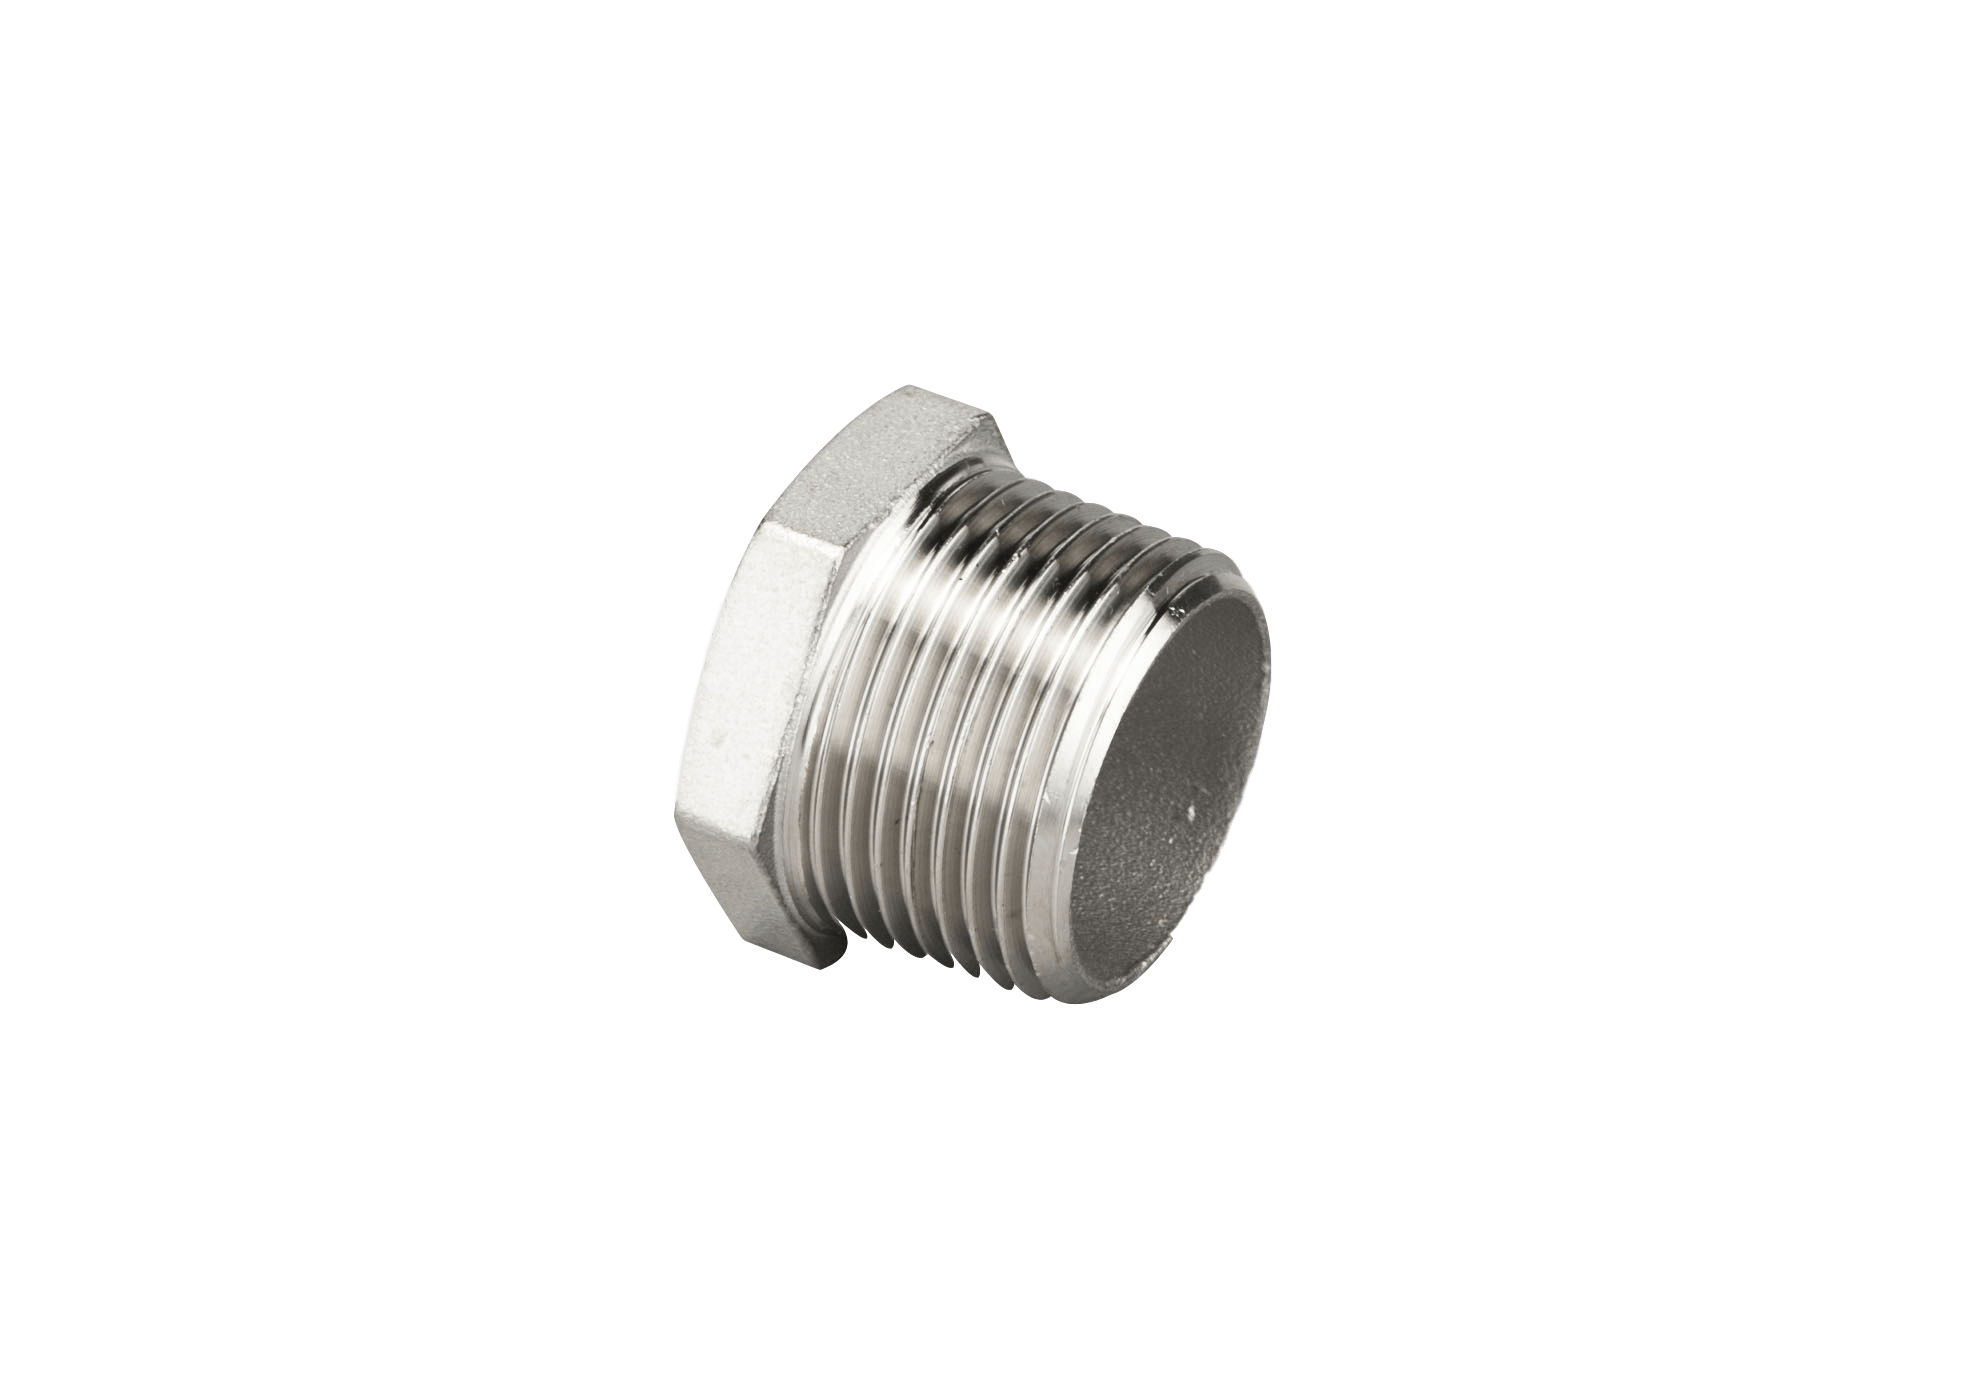 Hex.-Bushing, M/F, # 325, AISI 316,  casted, sim. to EN 10241 (DIN 2990)